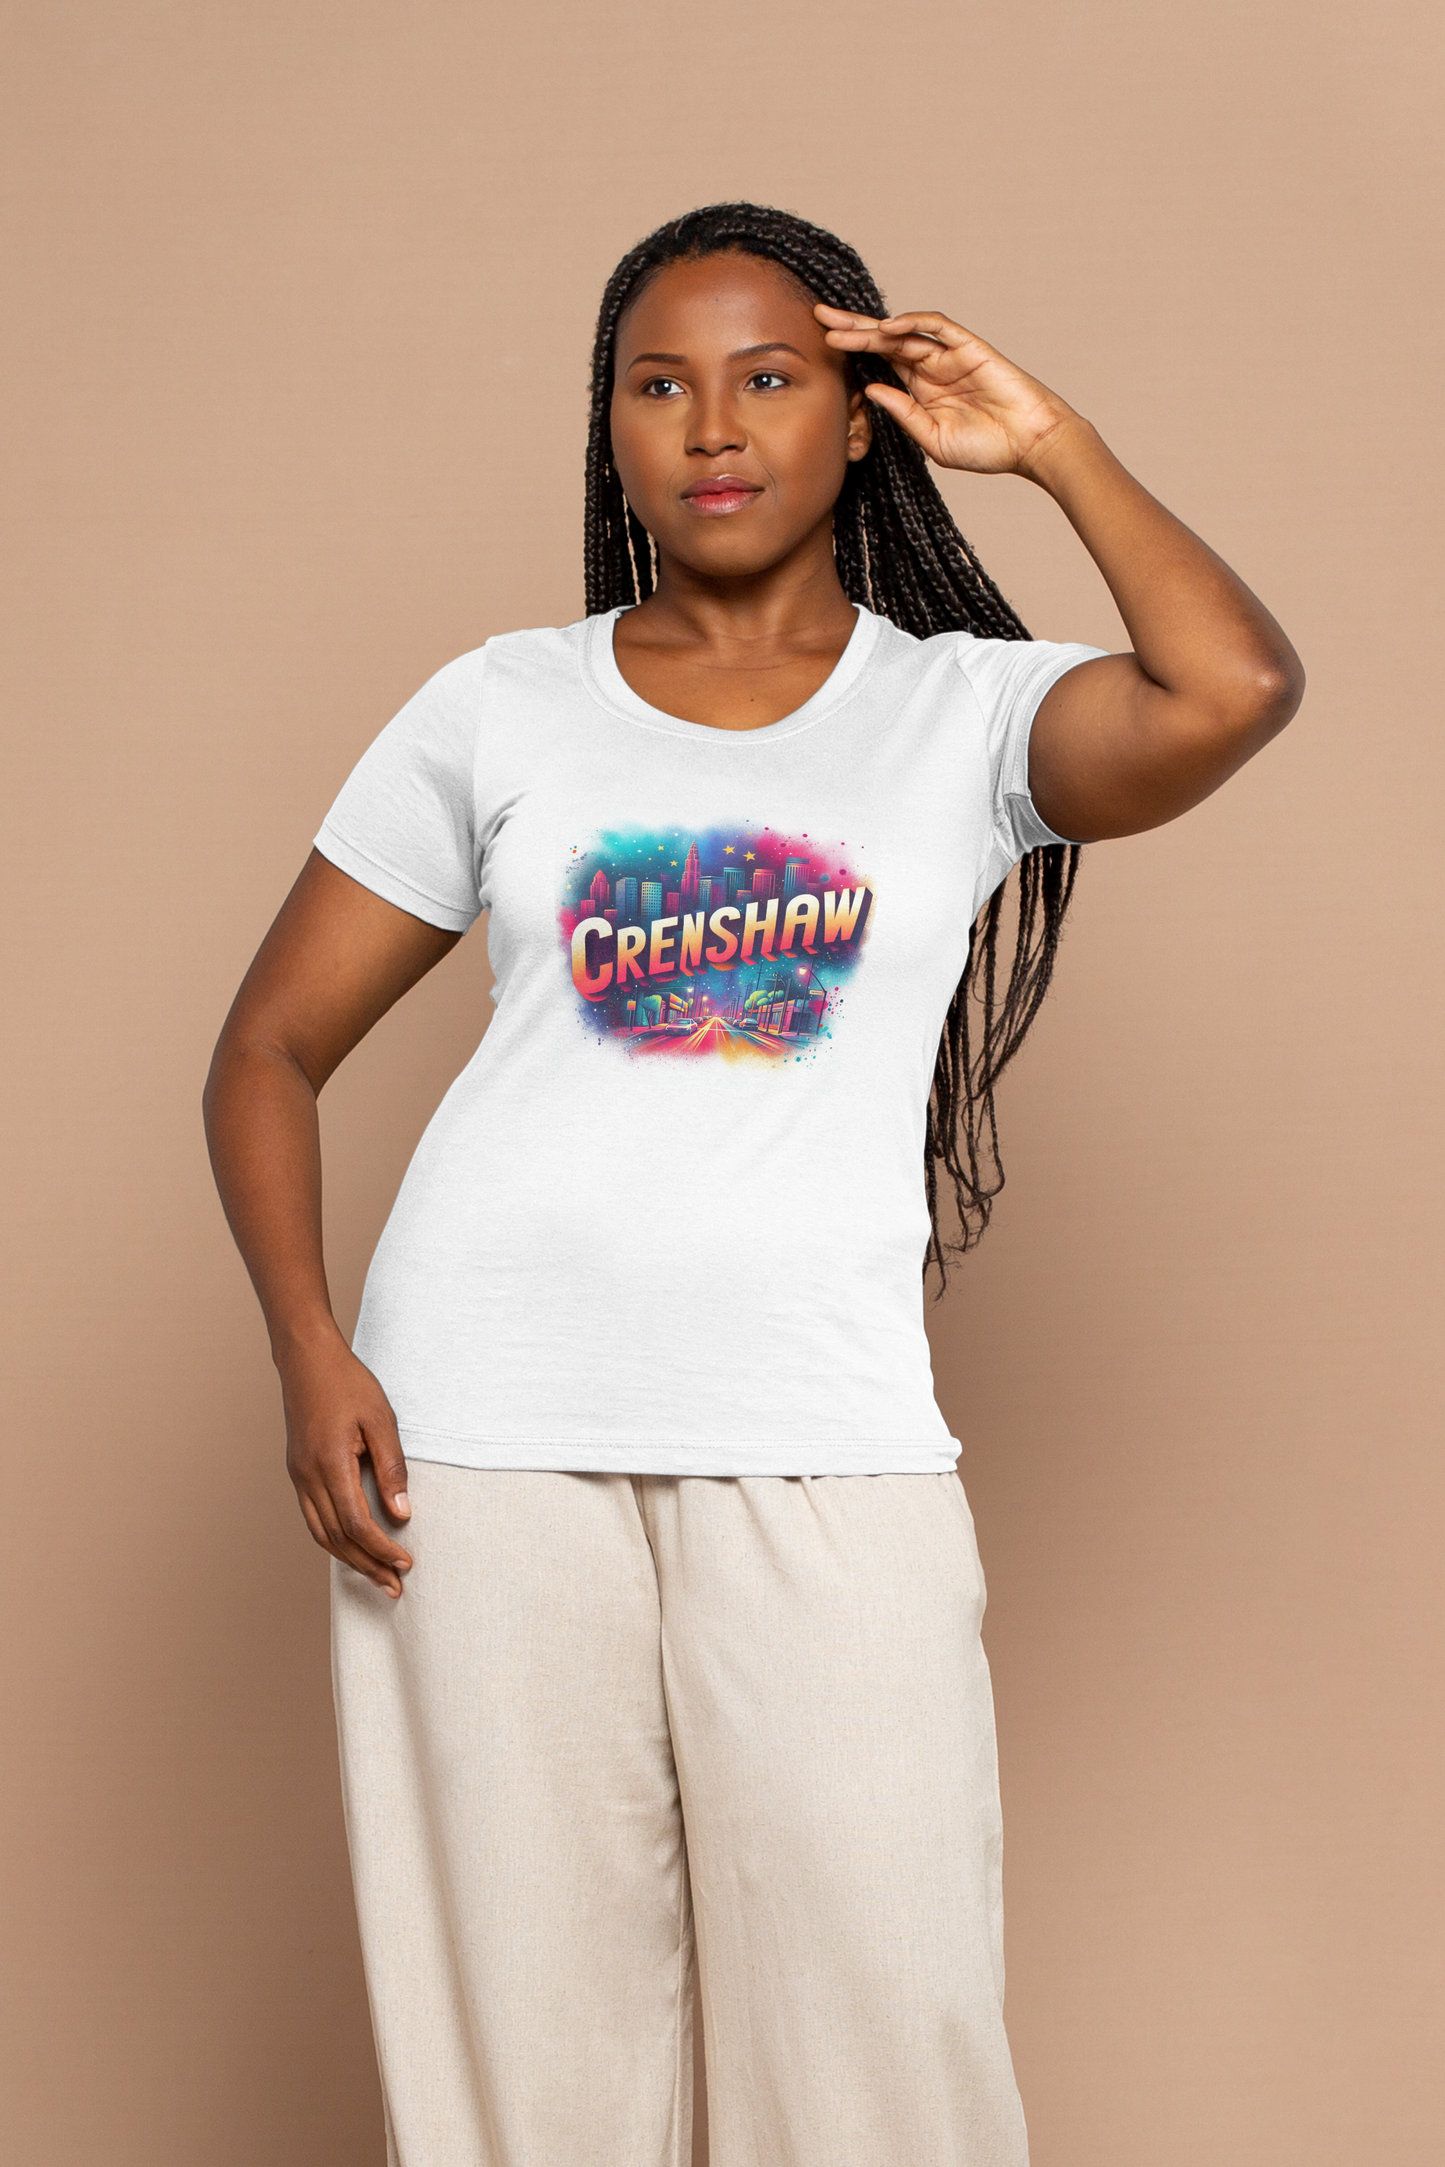 CRENSHAW TWO WHITE T-SHIRT, Back in the Day, African American, Black History, Black Neighborhood, Graphic T-shirt, Urban Streetwear Unisex Jersey Short Sleeve Tee